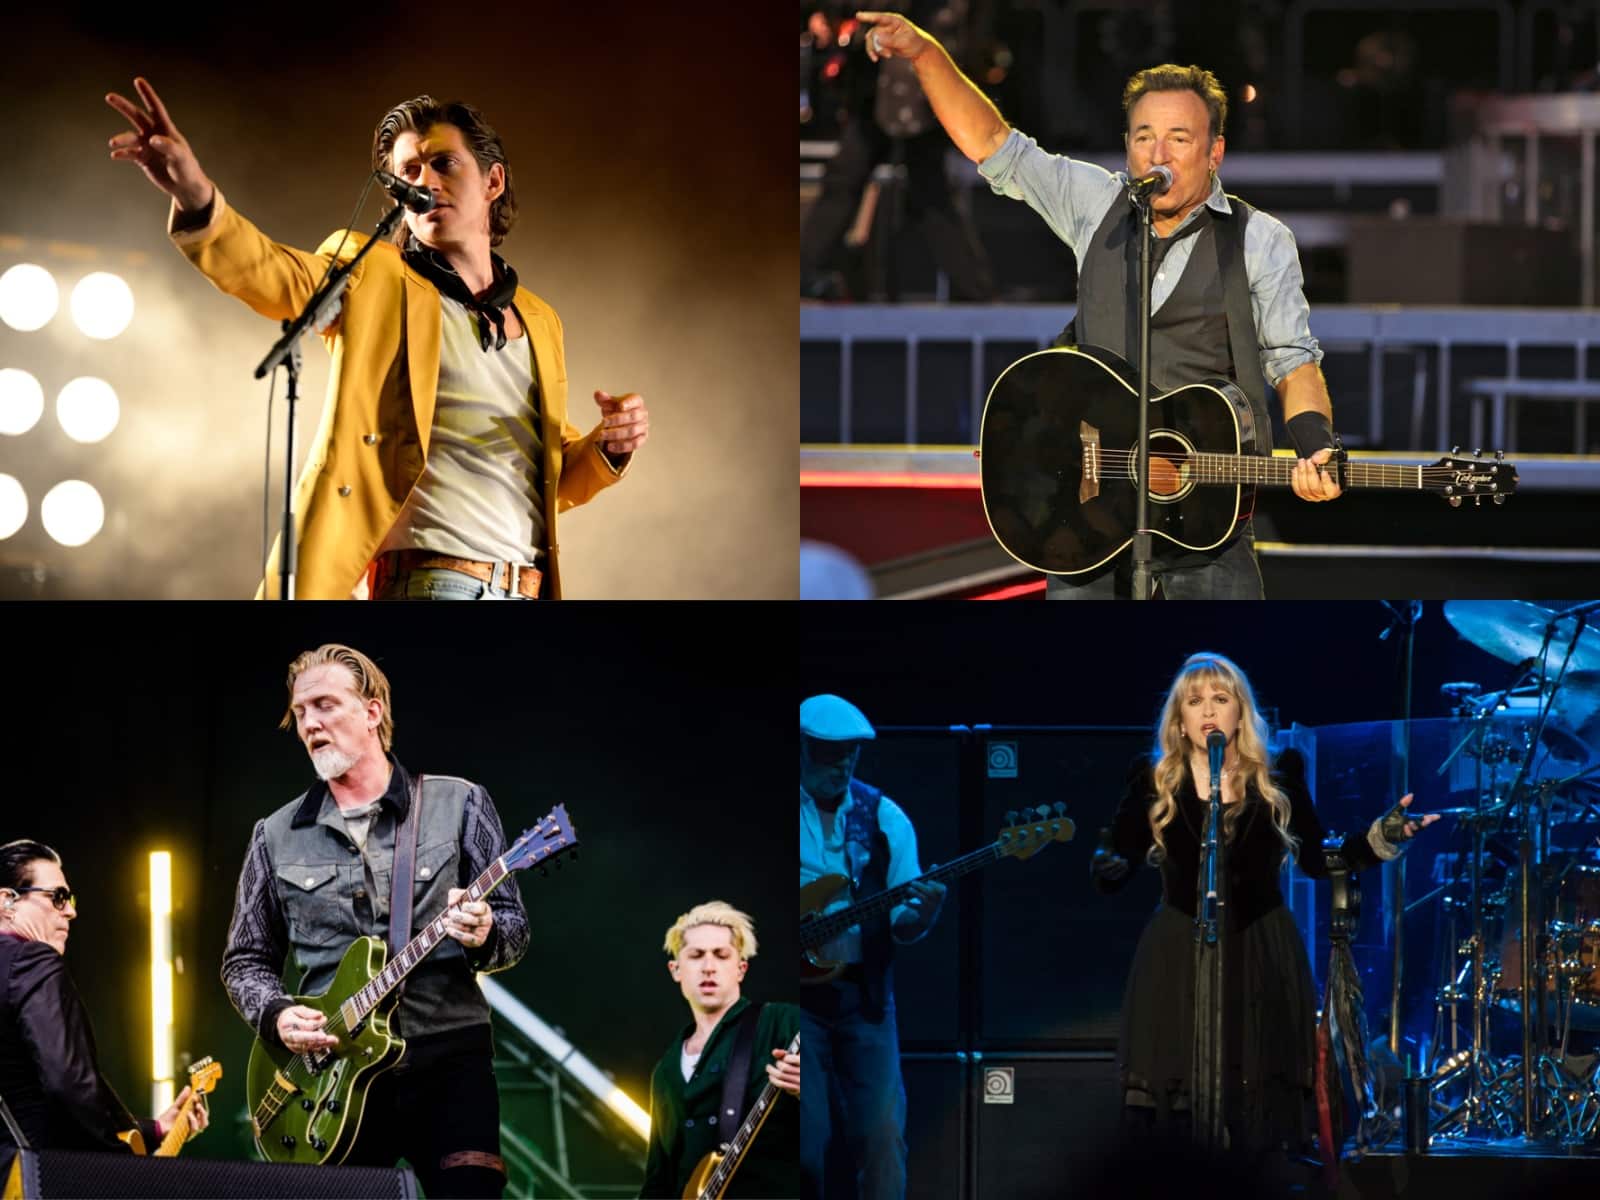 Image shows Artic Monkeys (top left), Bruce Springsteen (top right), Queens of the Stone Age (bottom left), and Fleetwood Mac (bottom right)